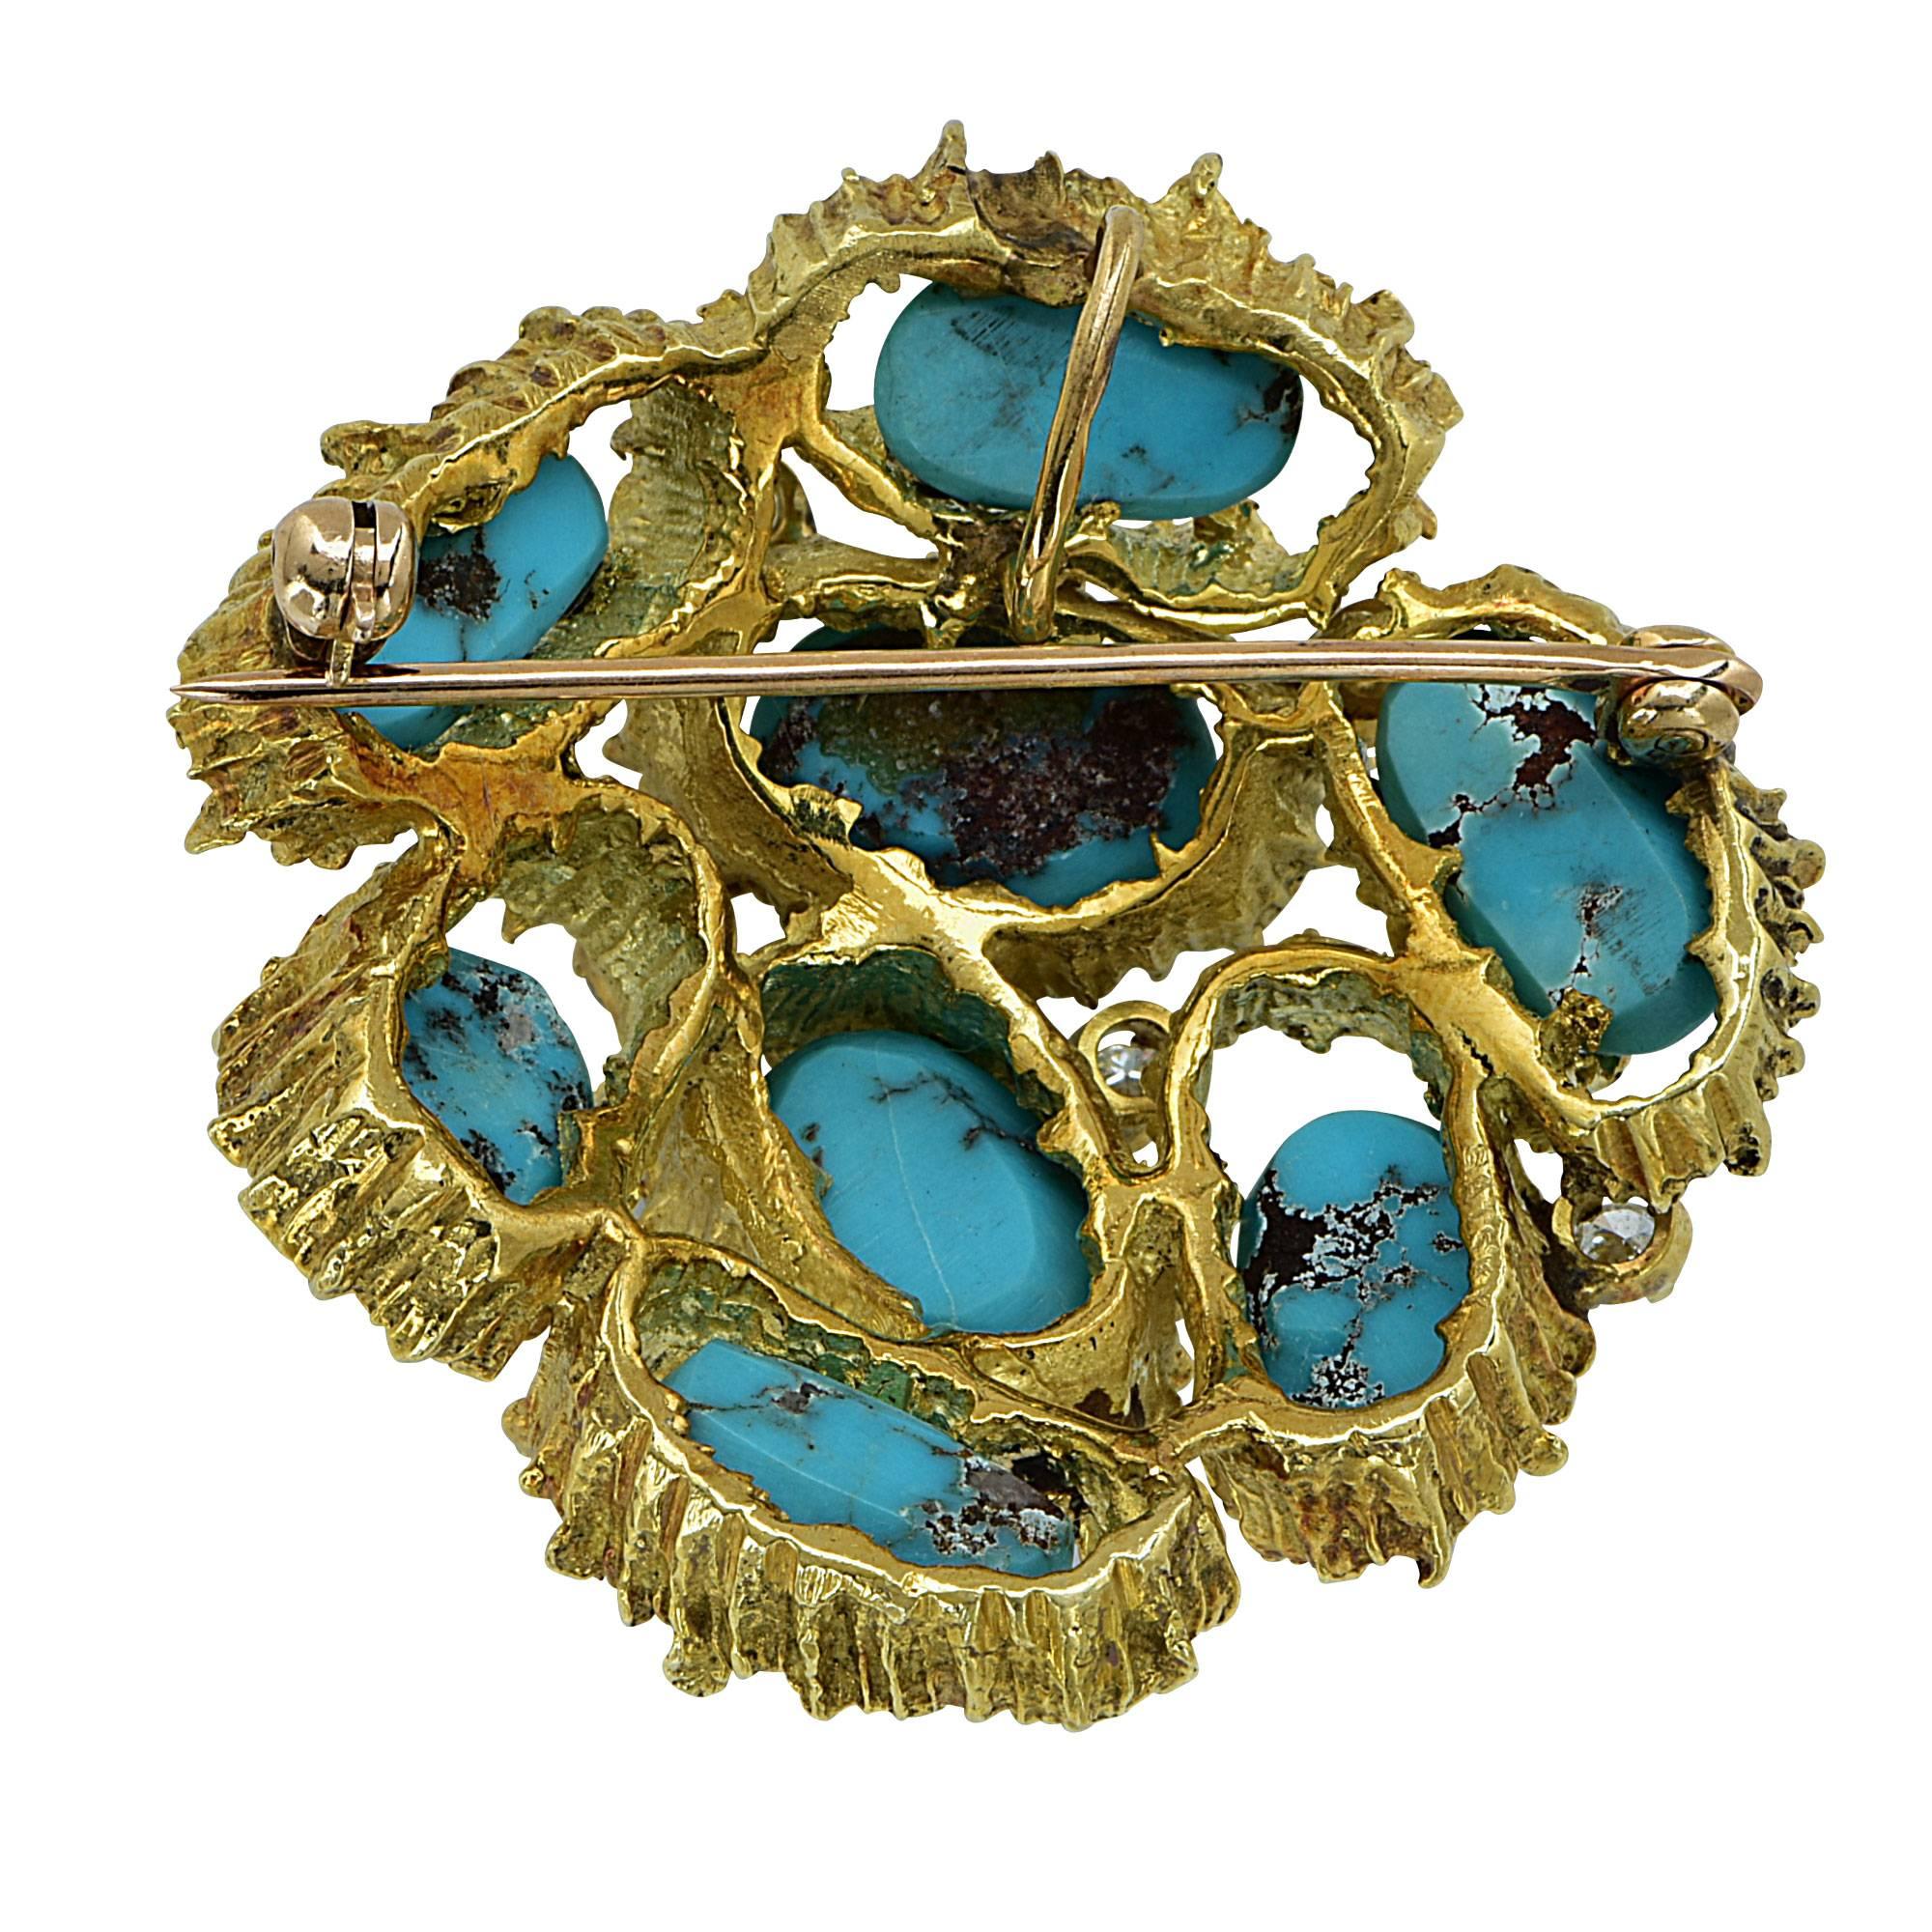 18k yellow gold brooch featuring turquoise cabochons accented by 7 round brilliant cut diamonds weighing approximately .40cts total G color VS clarity.

Metal weight: 31.79 grams

This diamond and turquoise brooch is accompanied by a retail